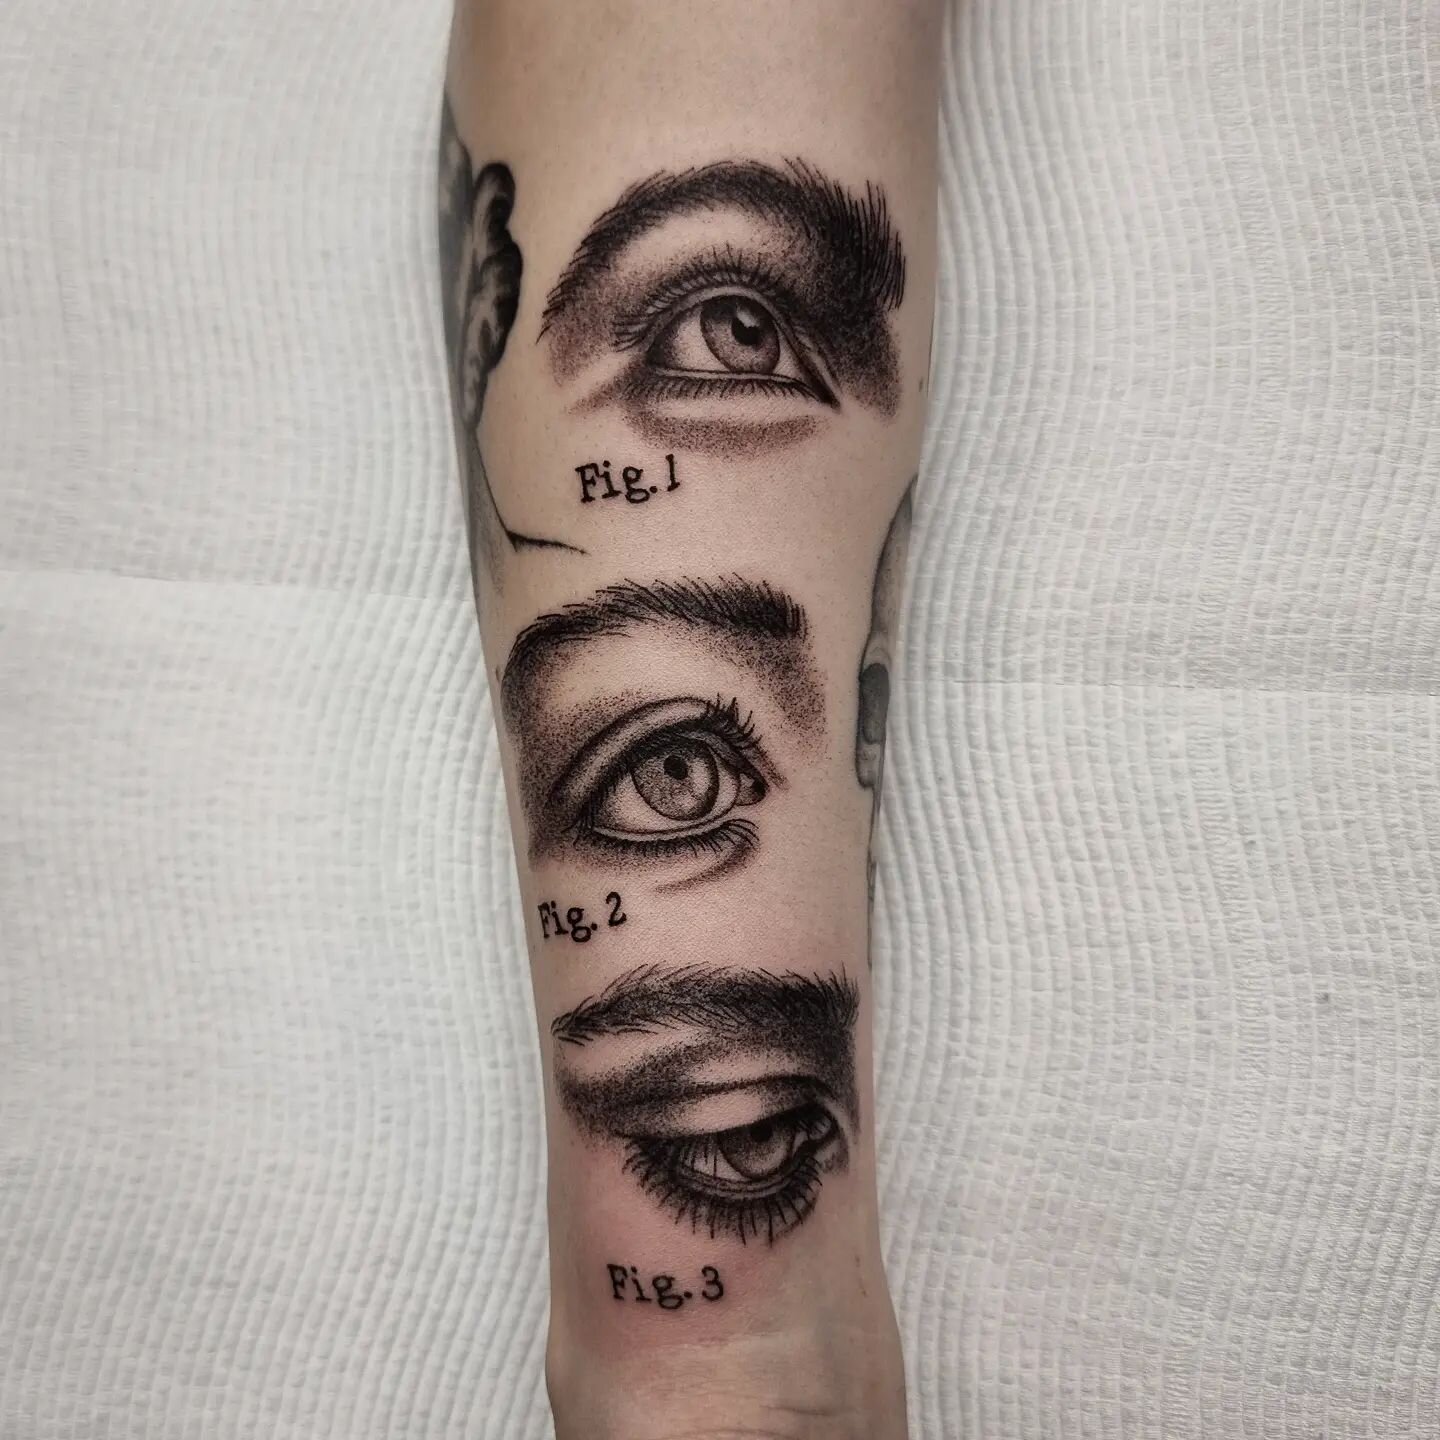 A series of eyes for Rochelle! I always have the best time tattooing you, thanks for the best ideas and the best chats! 👁👁👁
.
.
.
.
.
#scientificillustration #eyetattoo ##detailedtattoo #illustrativetattoo ##dotworktattoo #realismtattoo #blackandg